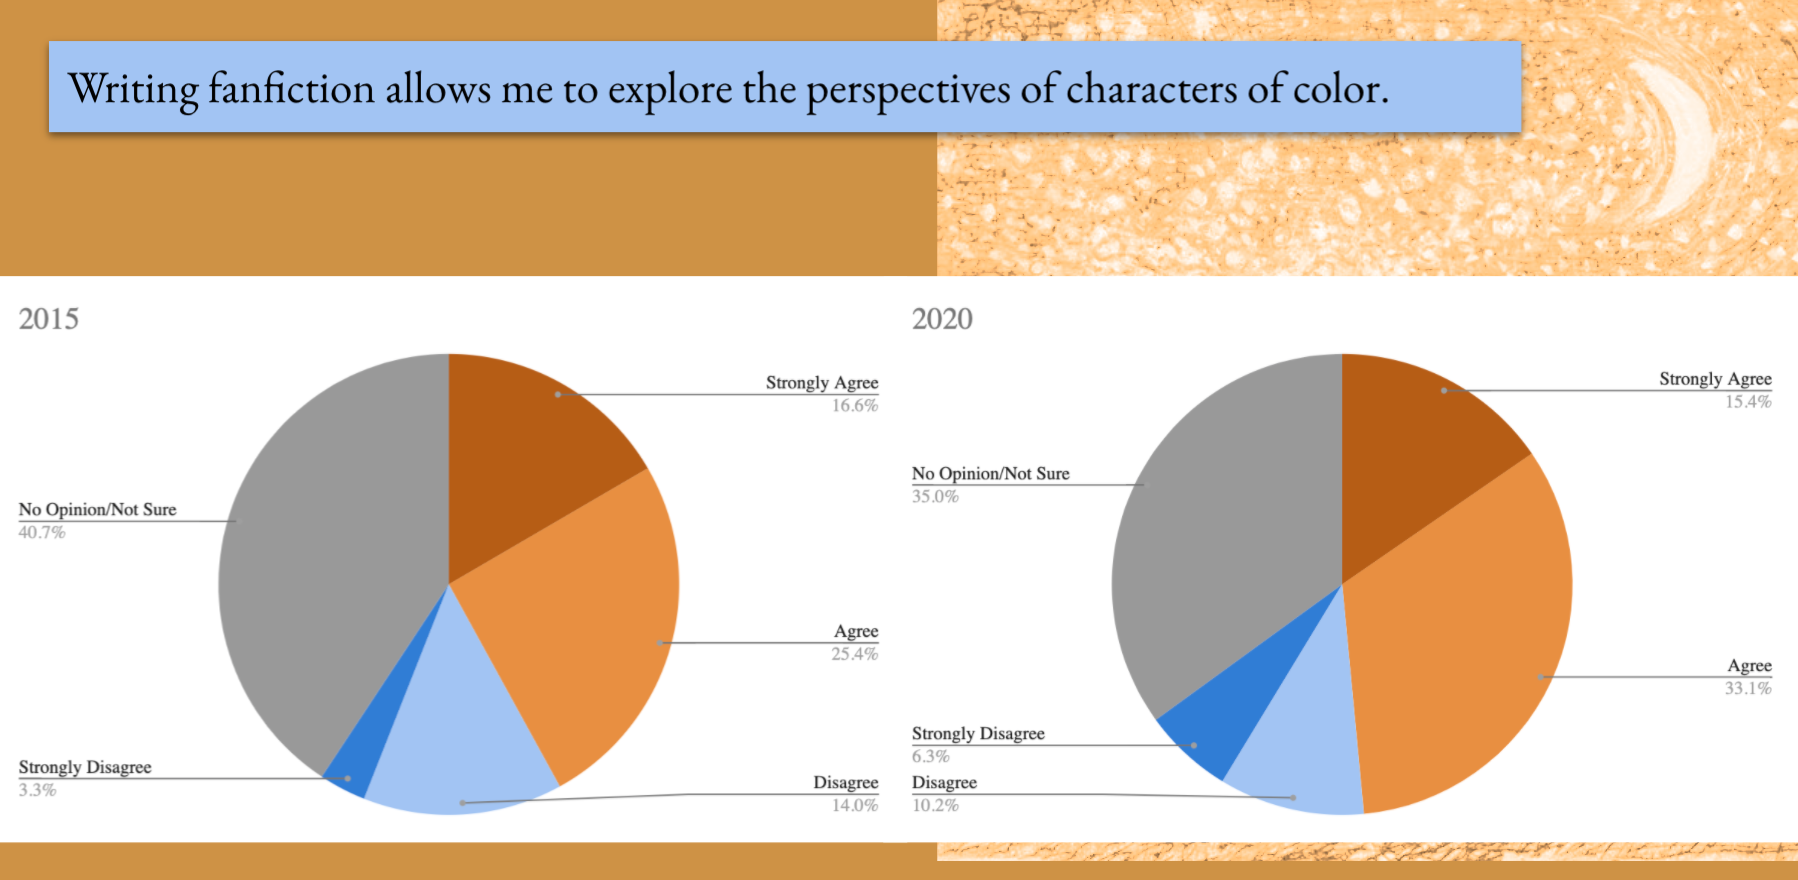 Far fewer authors agree that they use fanfic to explore the perspectives of characters of color, less than half in both surveys though the same slight increase in 2020 is again seen with just under half in 2020 agreeing